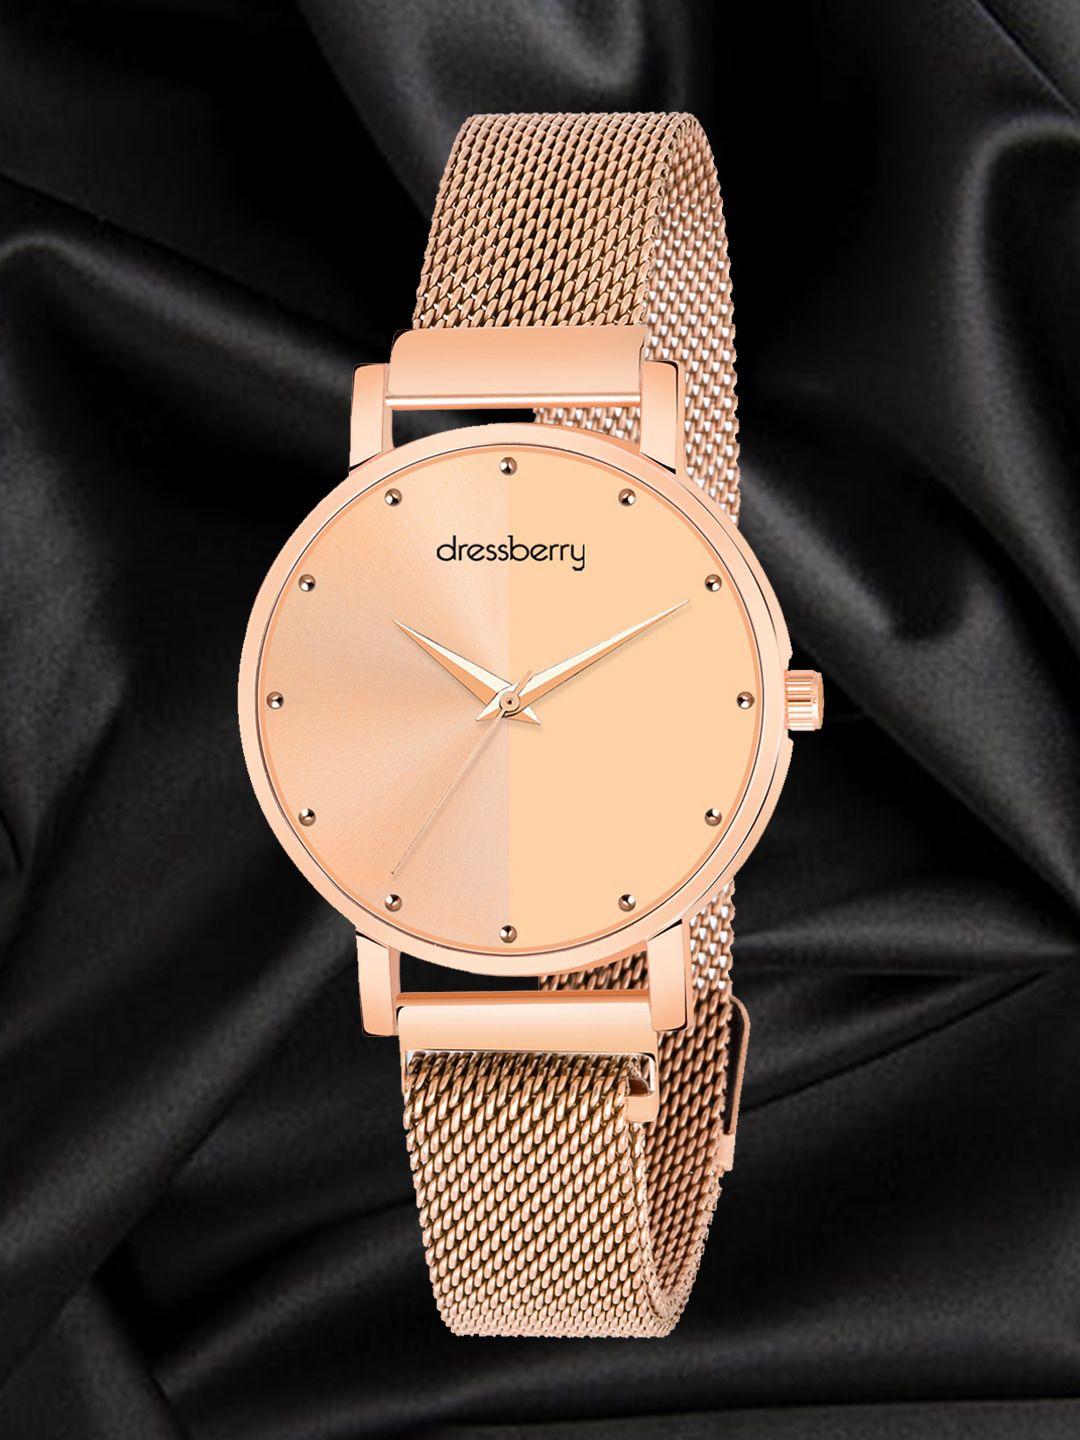 dressberry-women-rose-gold-toned-water-resistance-analogue-watch-hobdb-172-rg